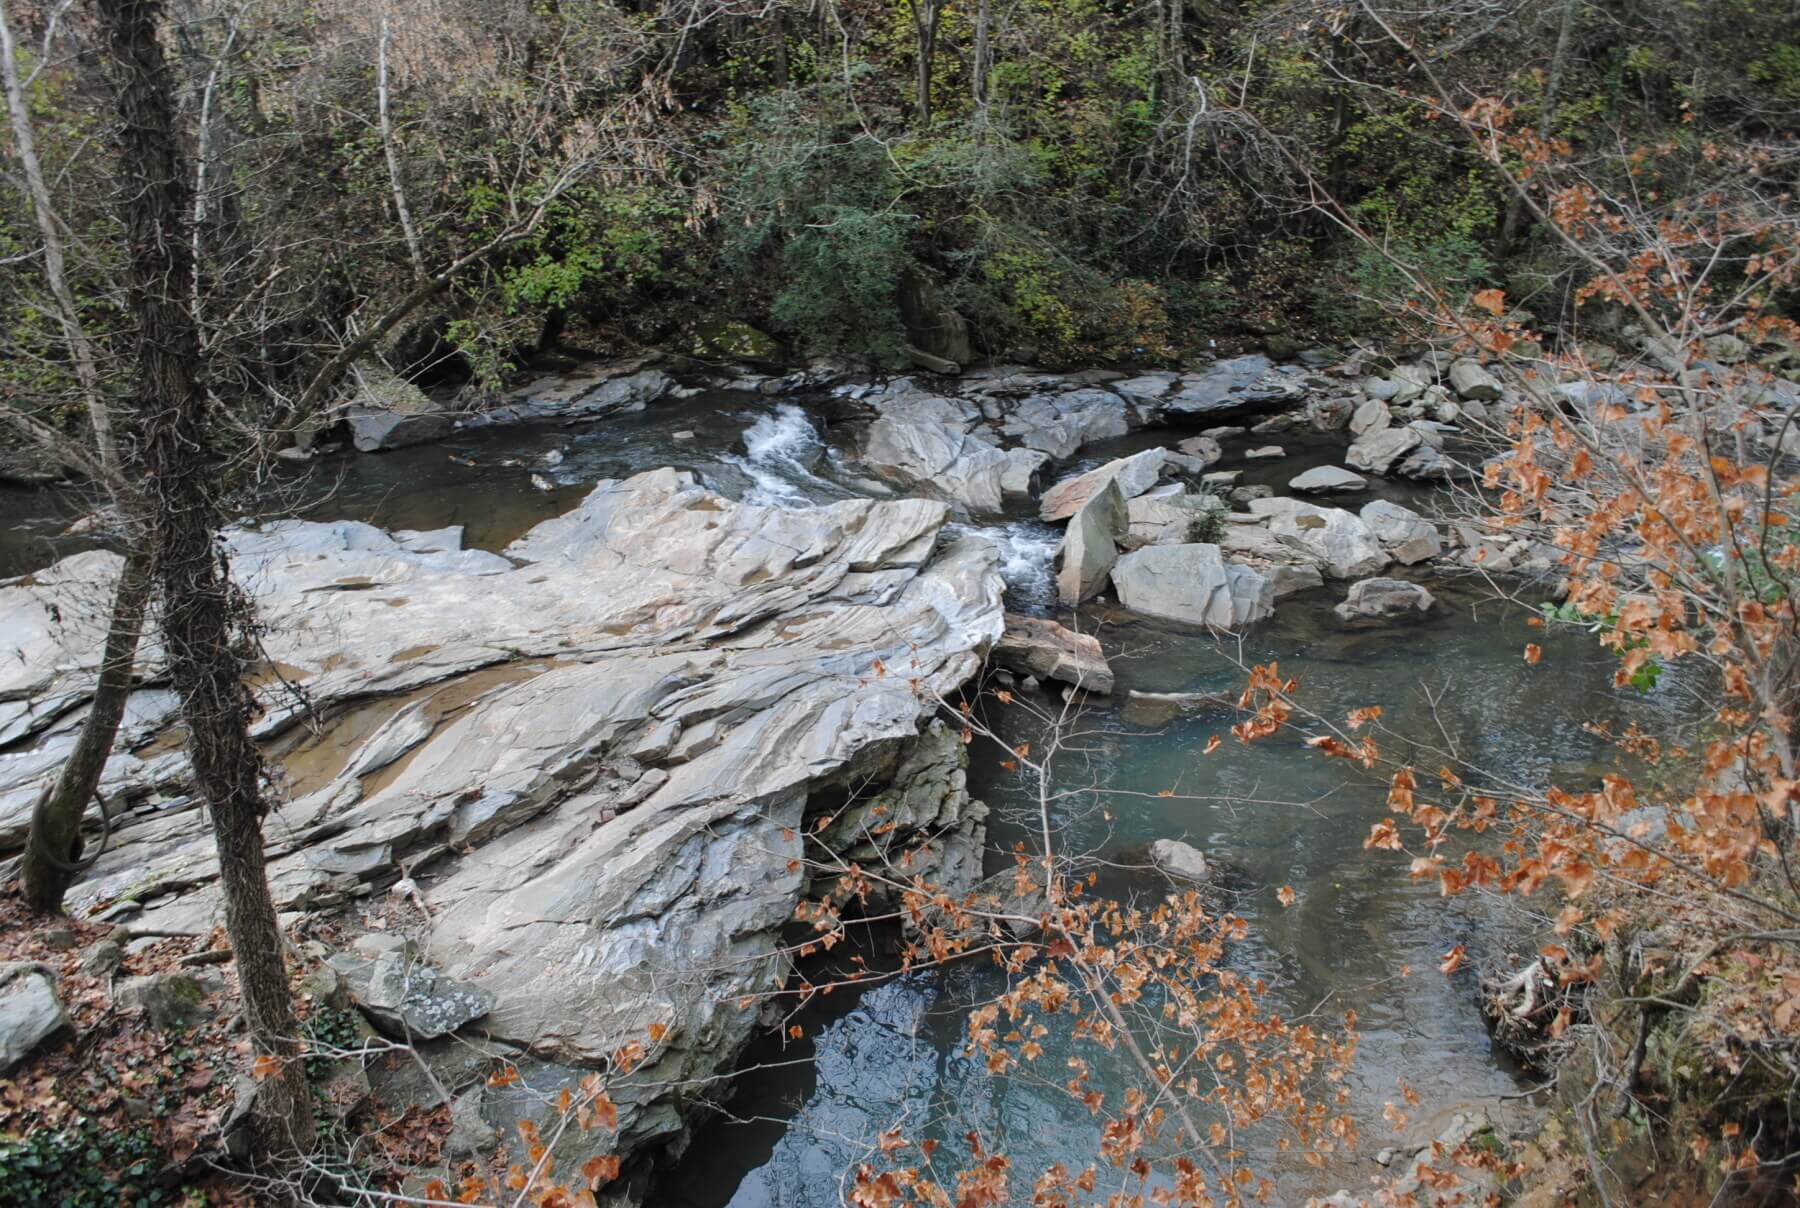 Creek and nature at the Chattahoochee RiverLands